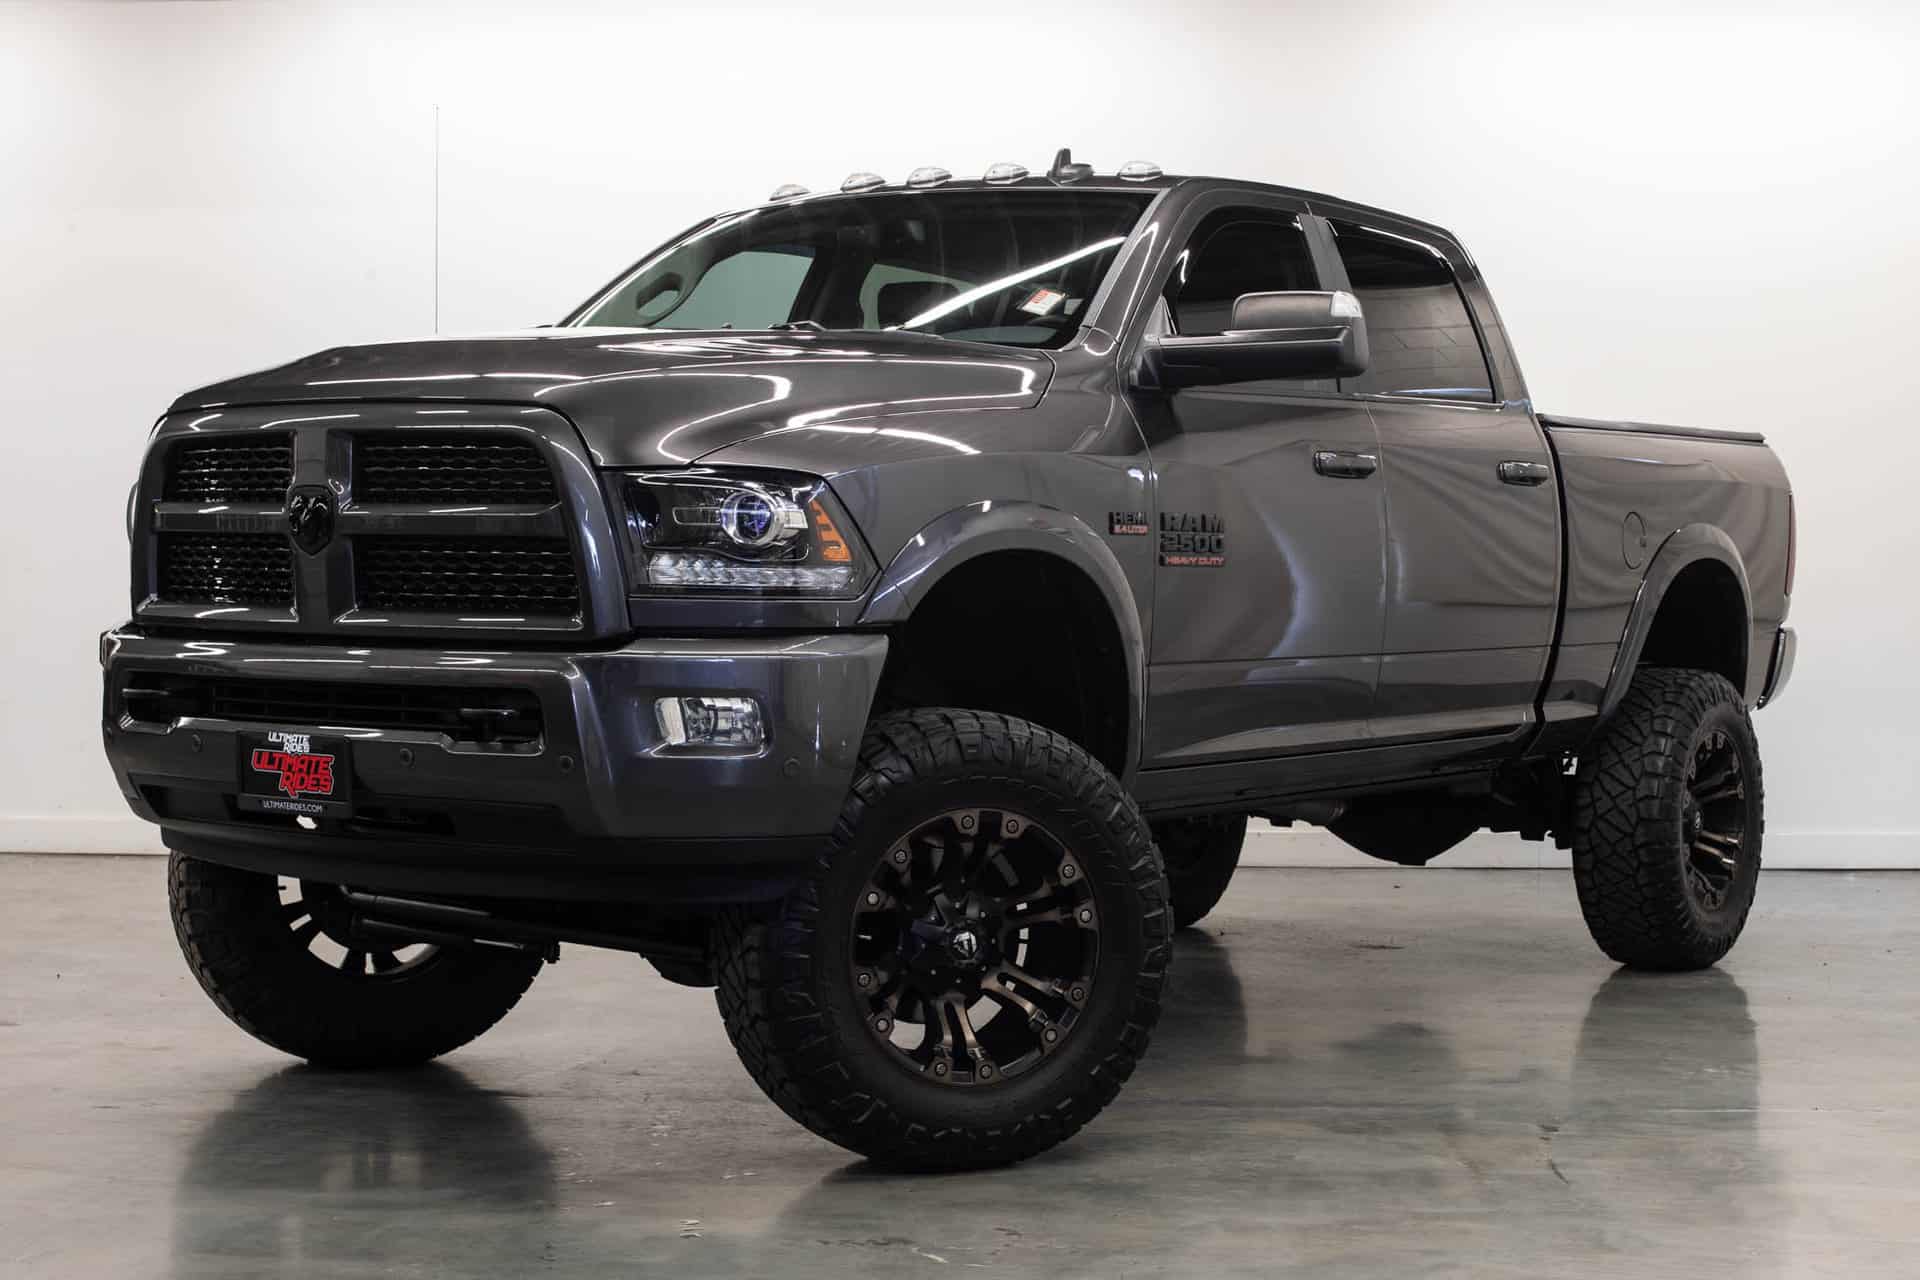 Lifted Trucks for Sale Online